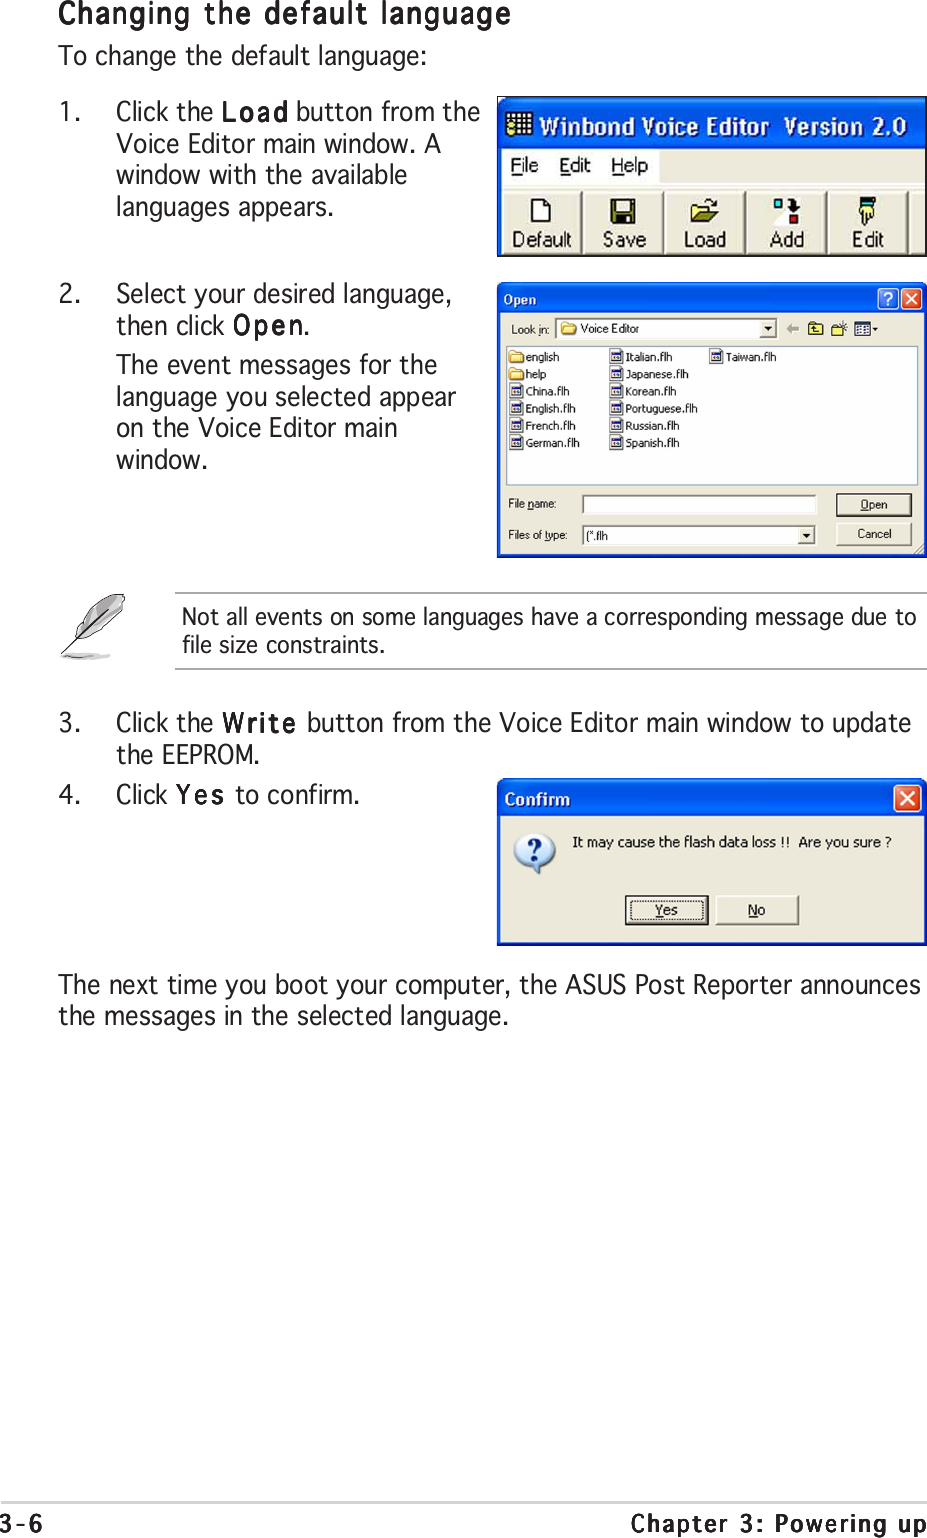 3-63-63-63-63-6 Chapter 3: Powering upChapter 3: Powering upChapter 3: Powering upChapter 3: Powering upChapter 3: Powering up3. Click the Write Write Write Write Write button from the Voice Editor main window to updatethe EEPROM.4. Click Yes Yes Yes Yes Yes to confirm.Changing the default languageChanging the default languageChanging the default languageChanging the default languageChanging the default languageTo change the default language:1. Click the LoadLoadLoadLoadLoad button from theVoice Editor main window. Awindow with the availablelanguages appears.2. Select your desired language,then click OpenOpenOpenOpenOpen.The event messages for thelanguage you selected appearon the Voice Editor mainwindow.Not all events on some languages have a corresponding message due tofile size constraints.The next time you boot your computer, the ASUS Post Reporter announcesthe messages in the selected language.